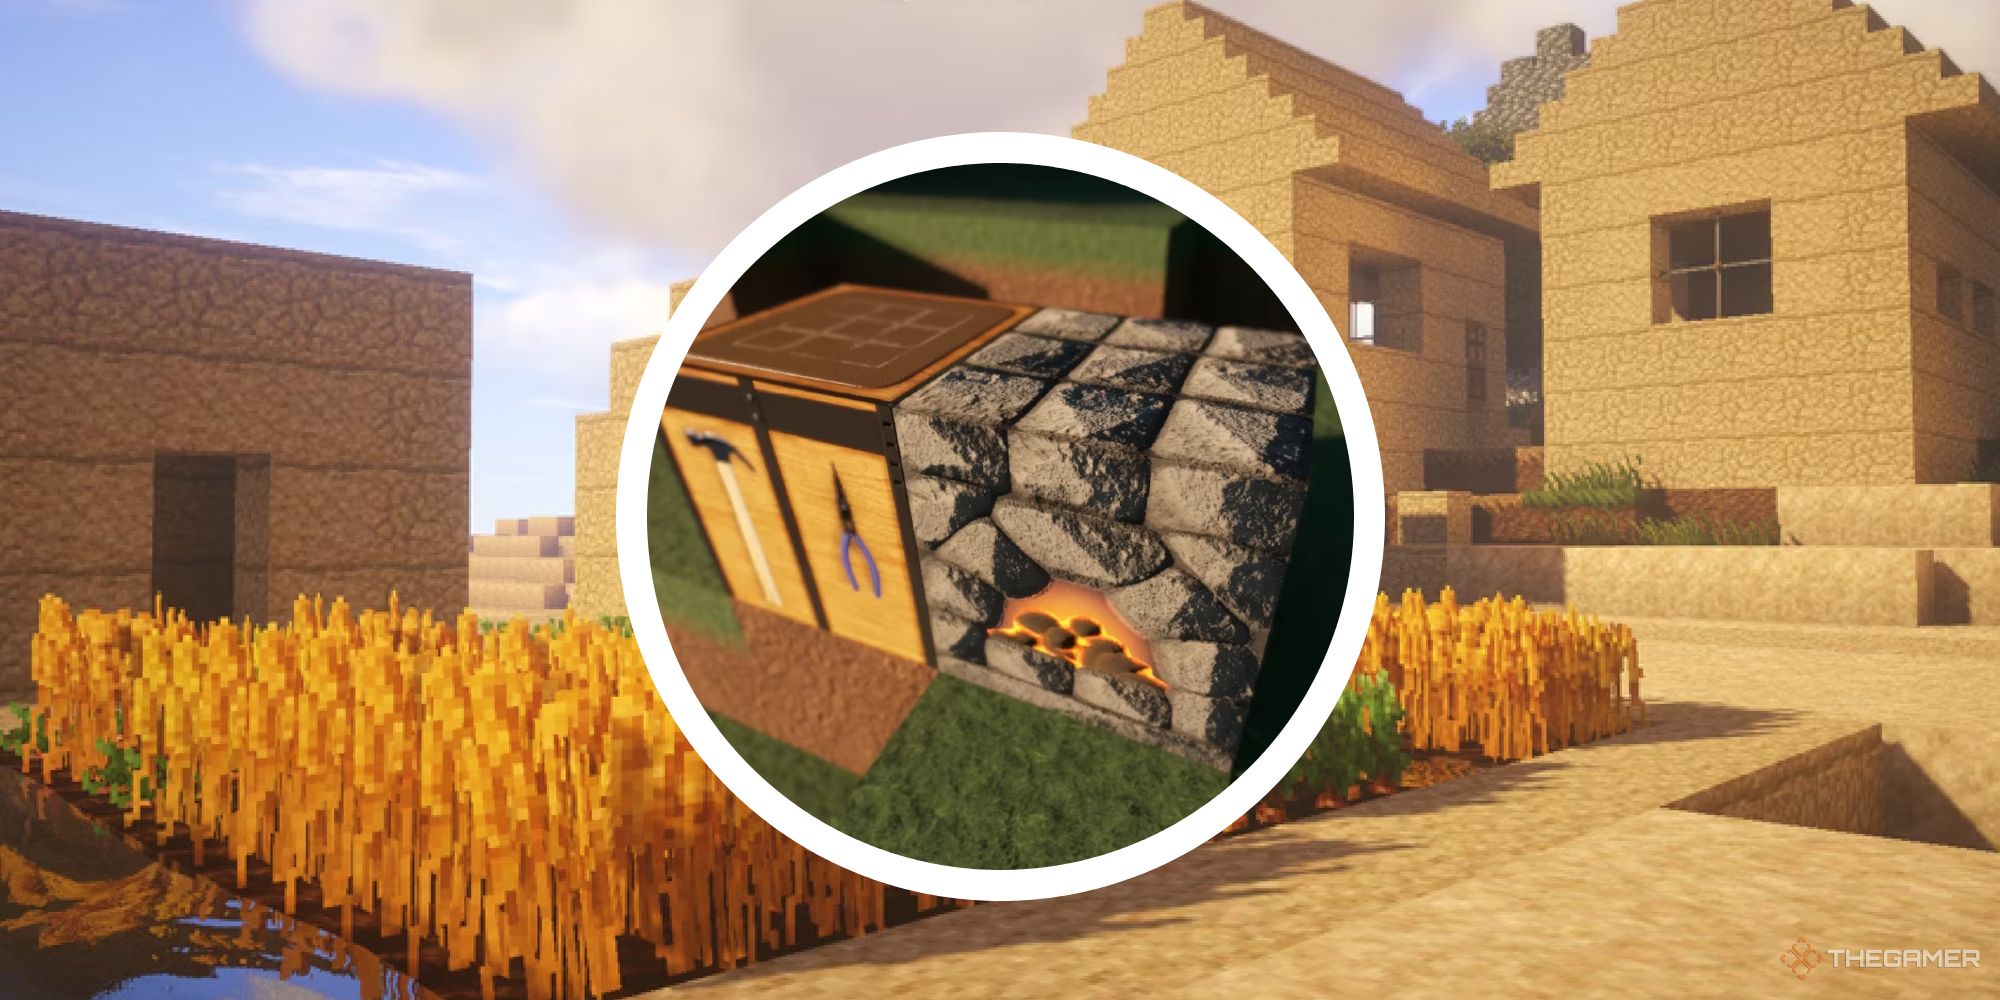 minecraft texture pack featured image showing house with circle of crafting station